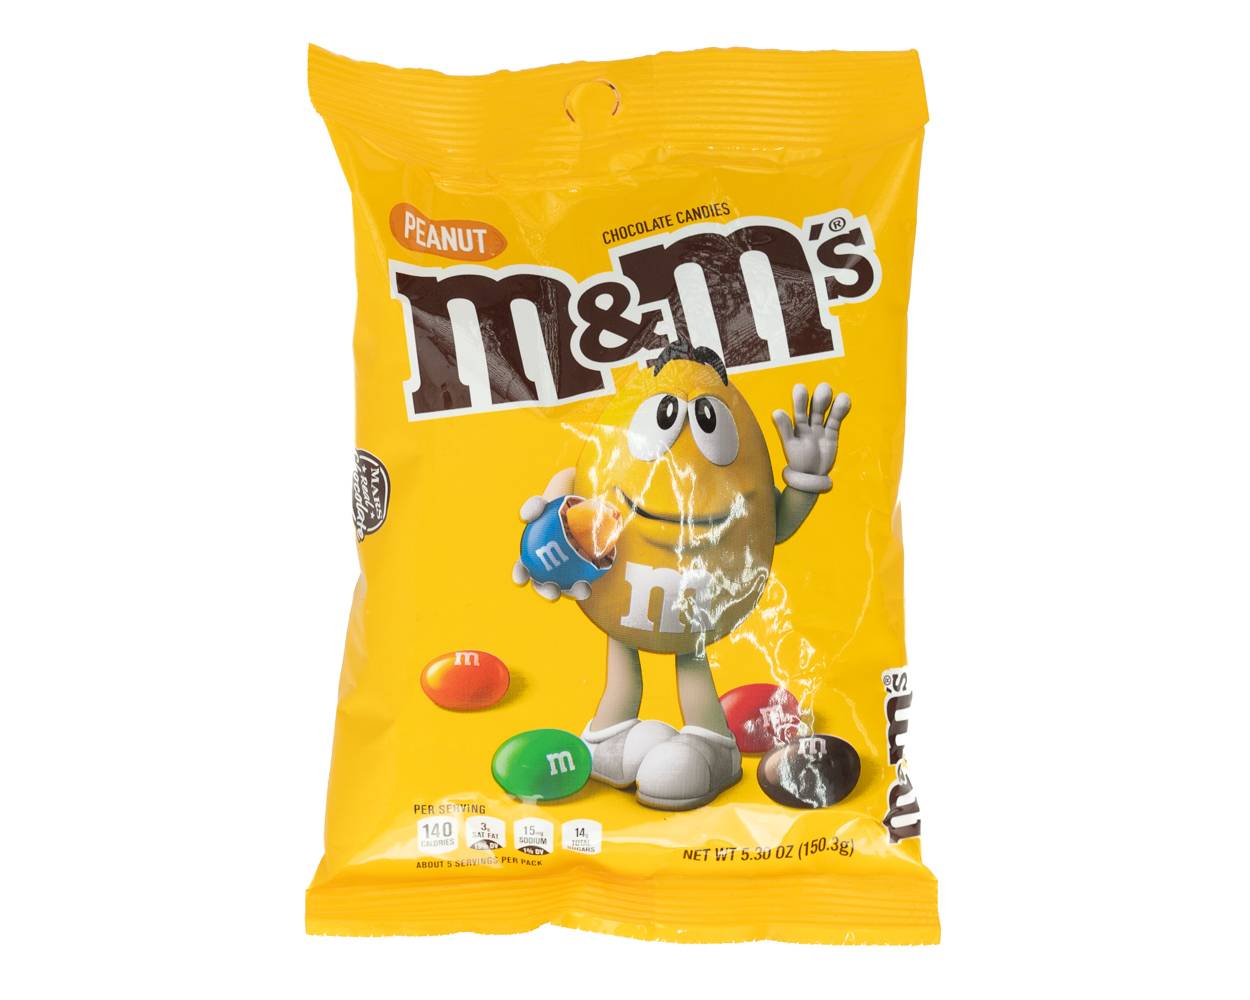 M&m's chocolates con cacahuate (49 g)